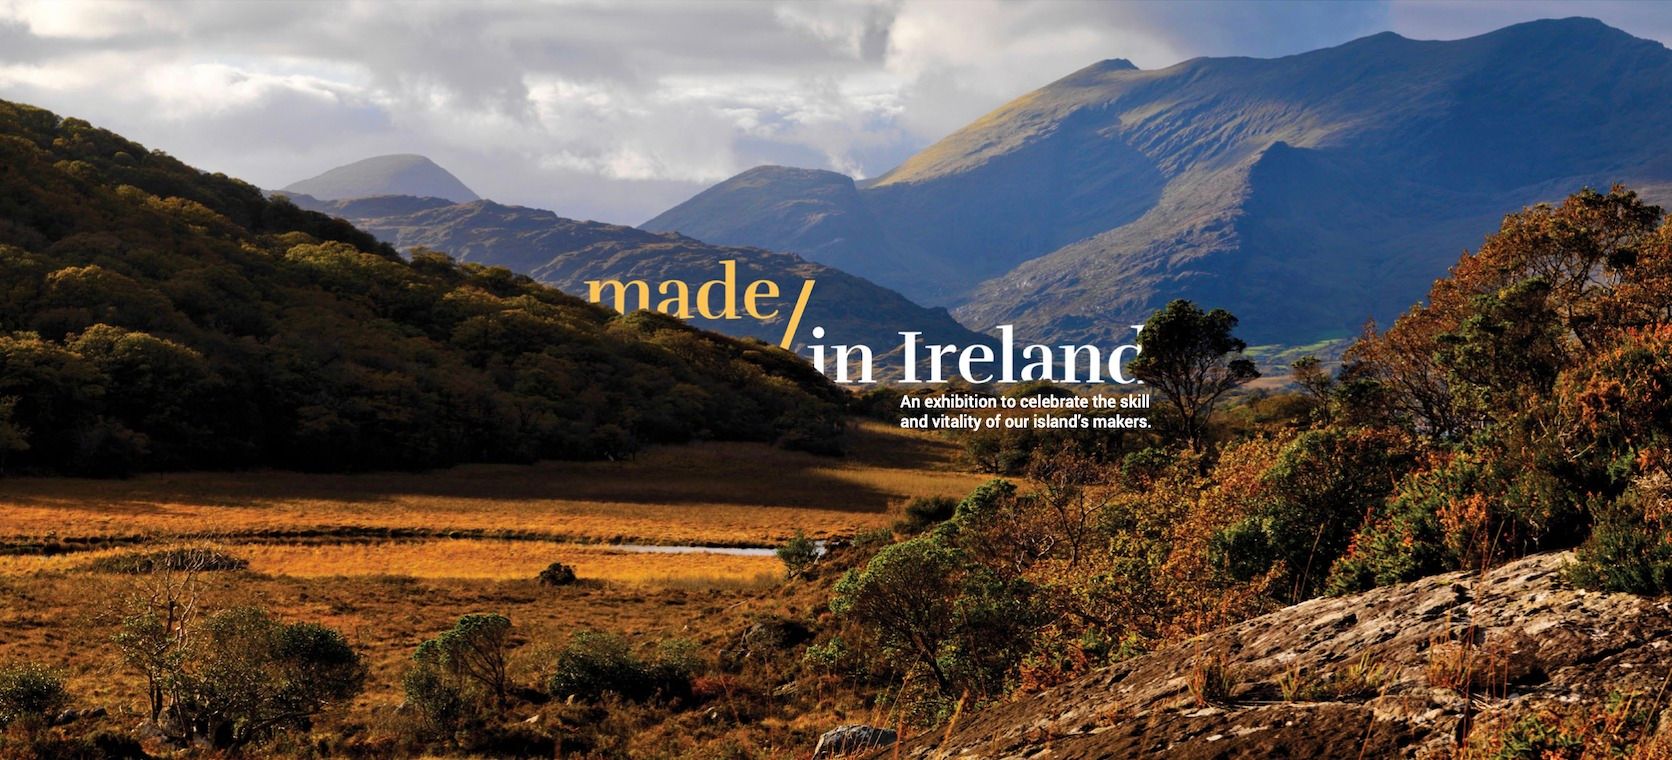 Mountainous landscape with words "Made In Ireland" in yellow and white